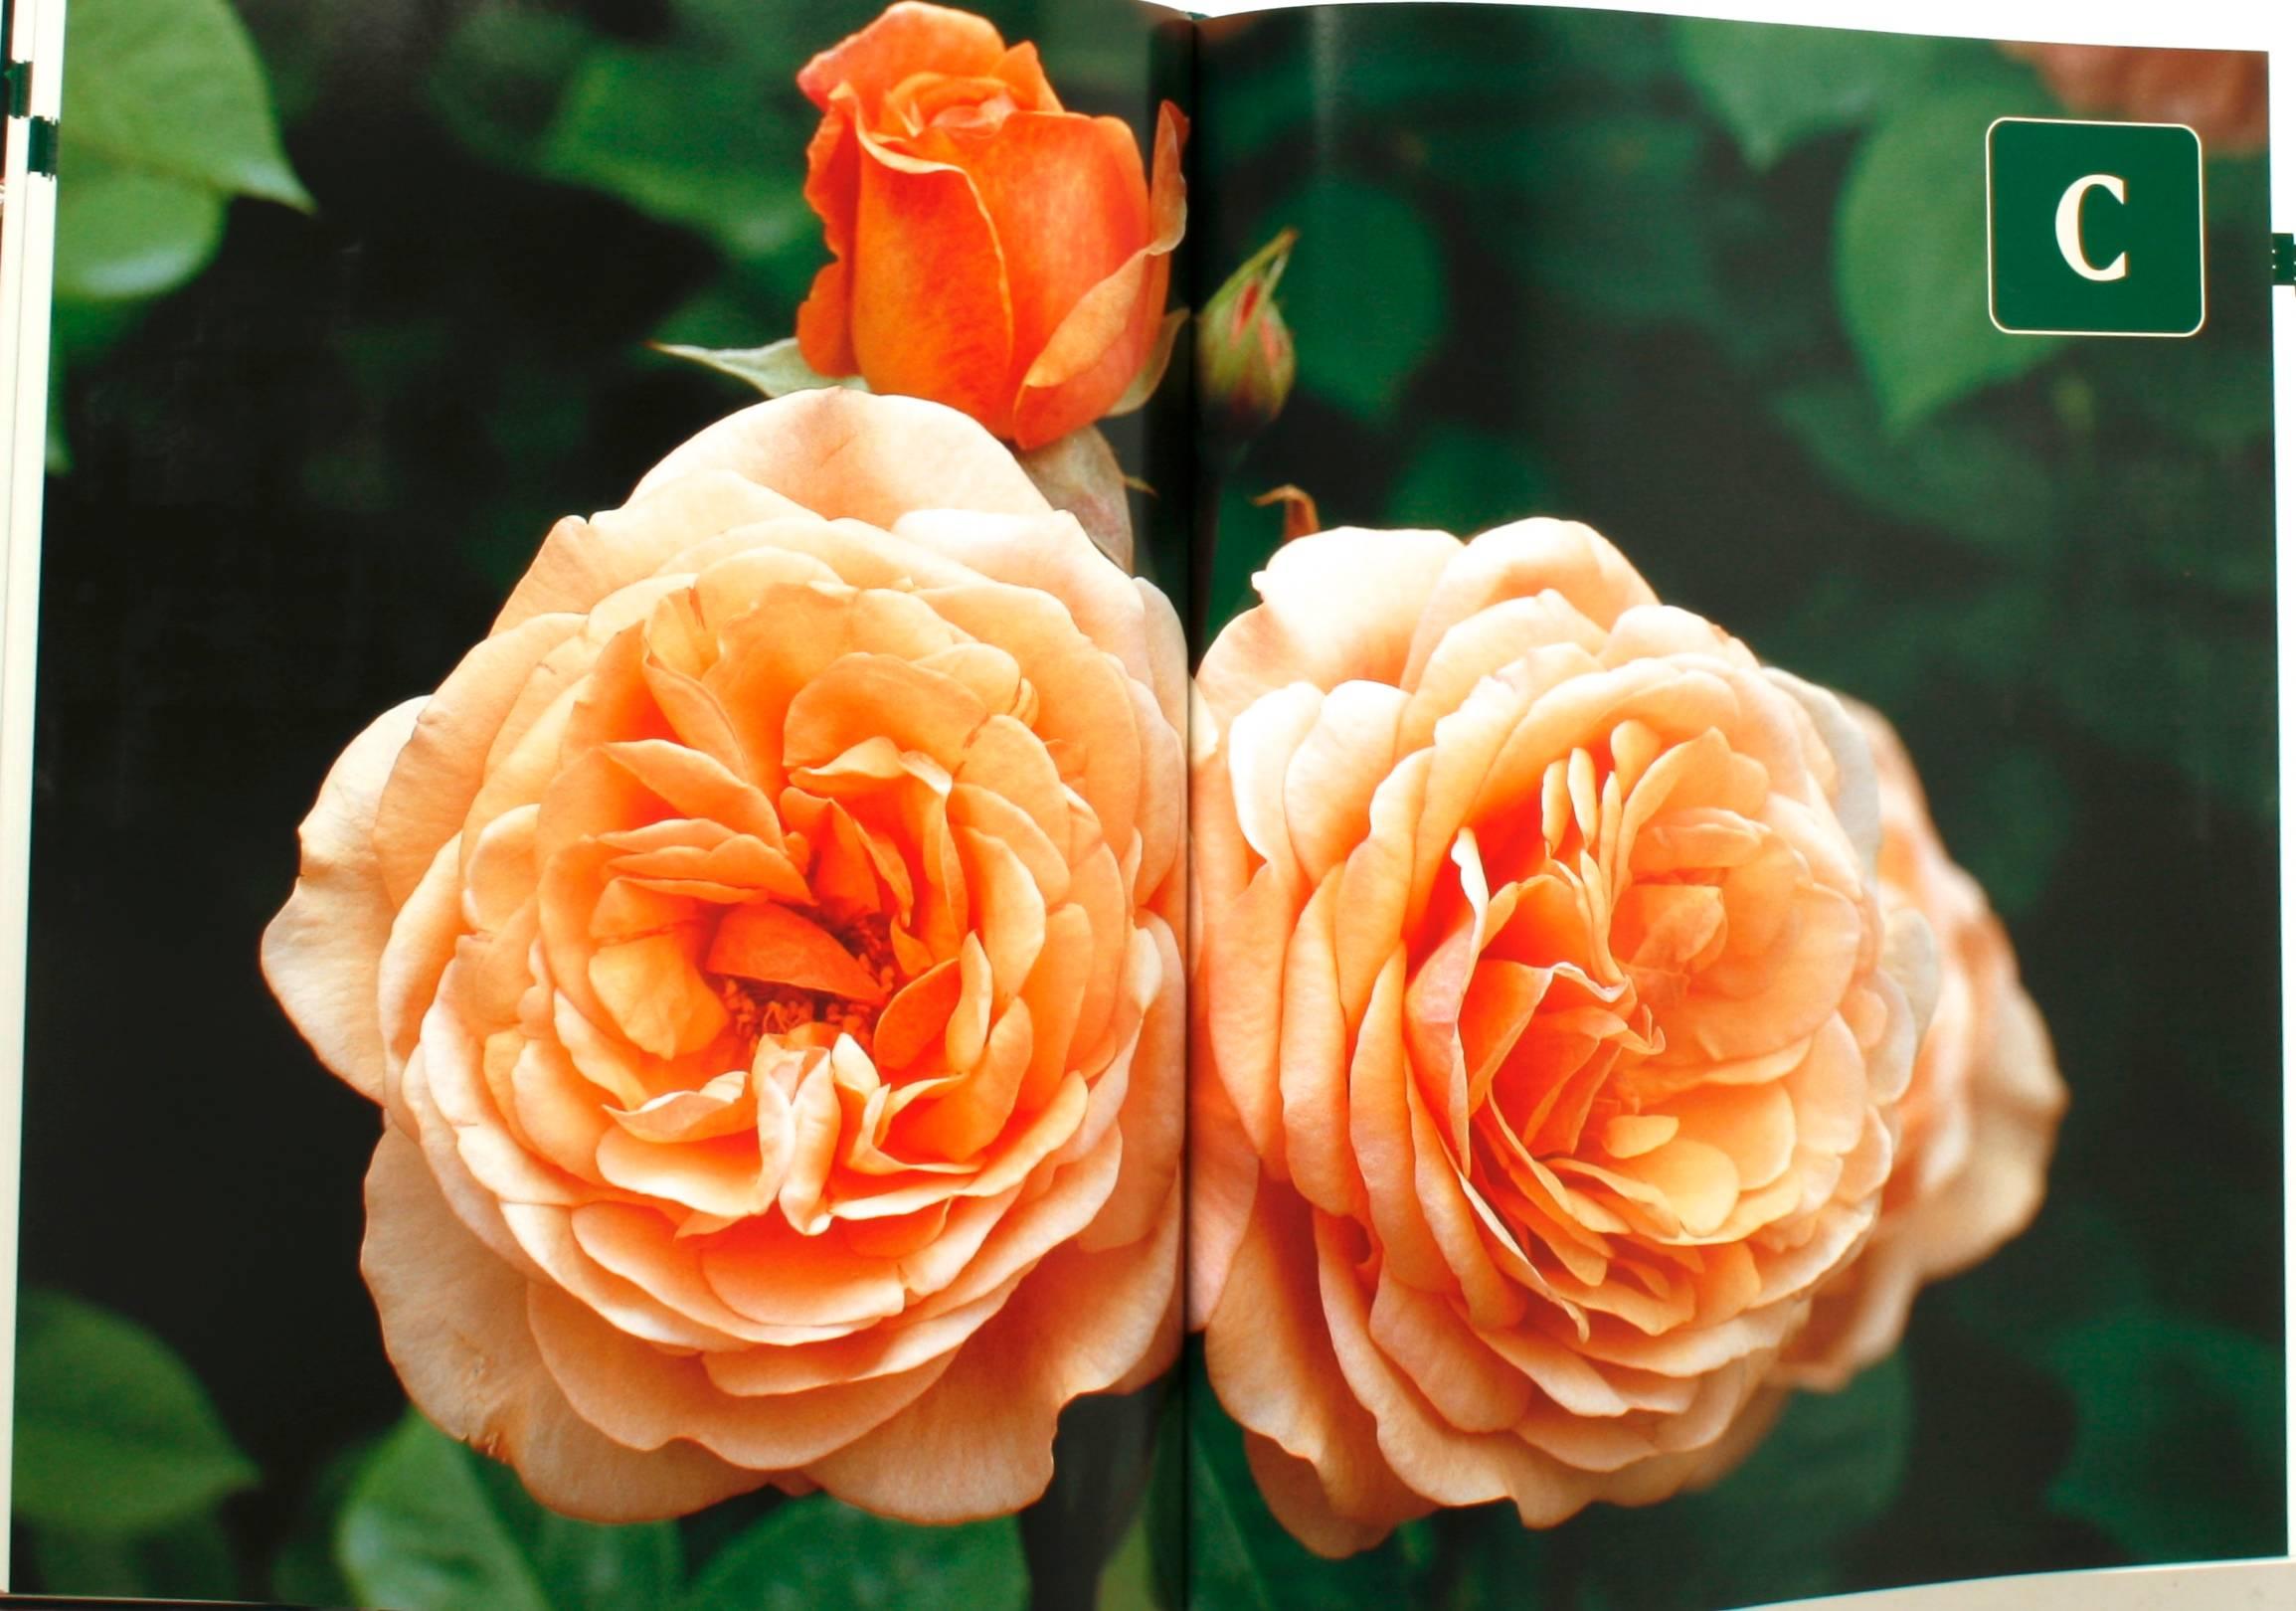 Paper Botanica's Roses, The Encyclopedia of Roses